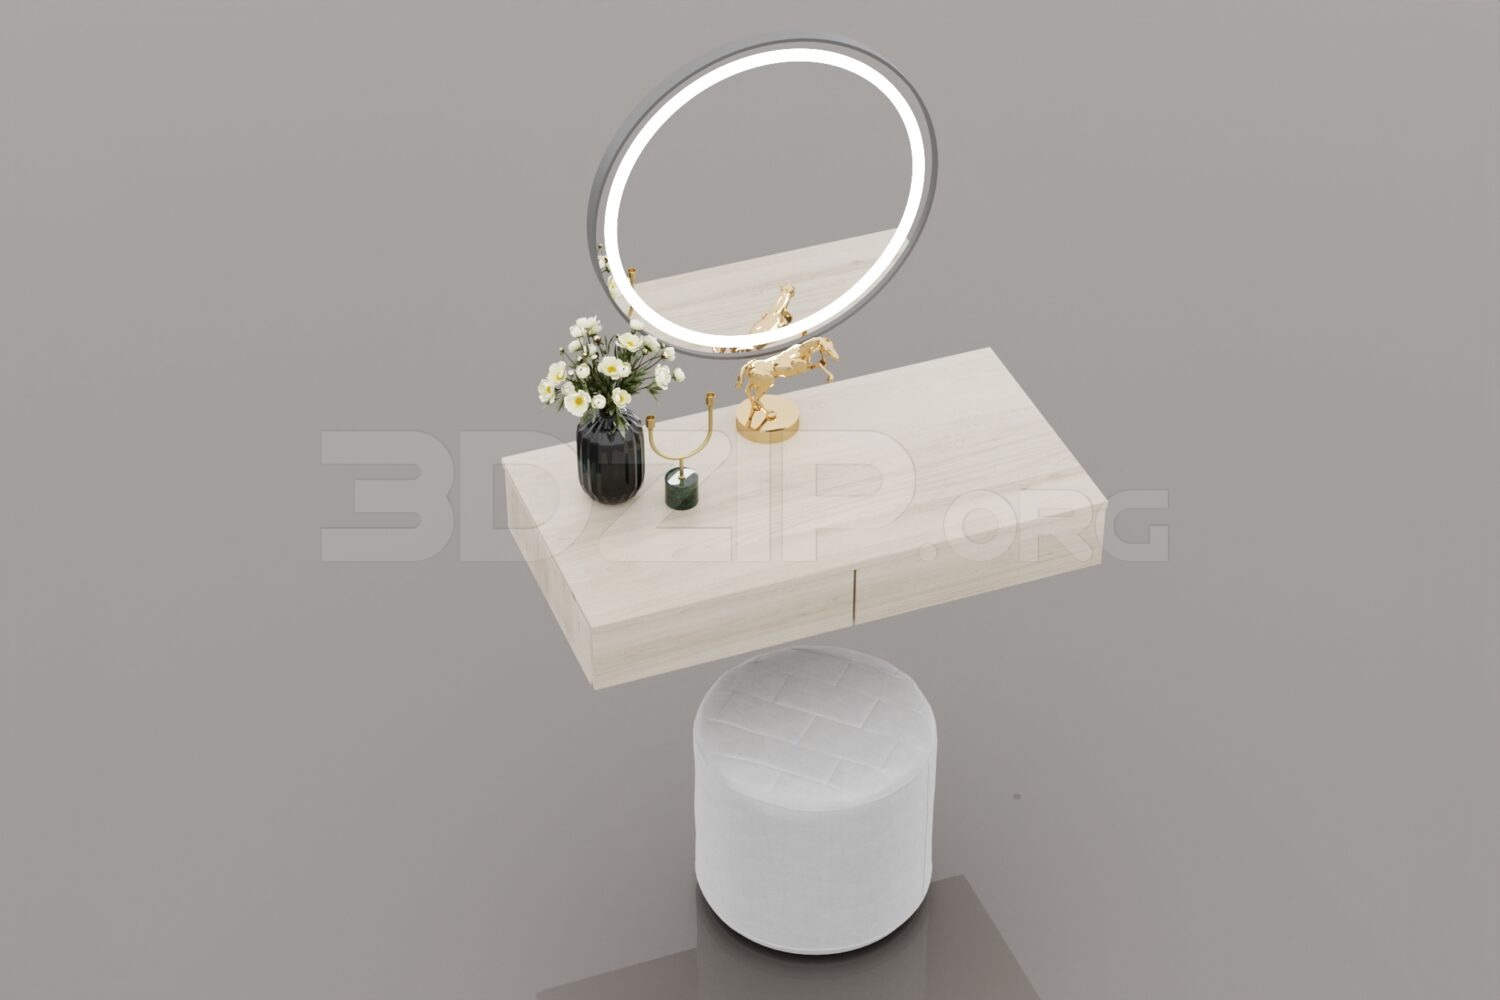 320. Download Free Dressing Table Model By Tuan An